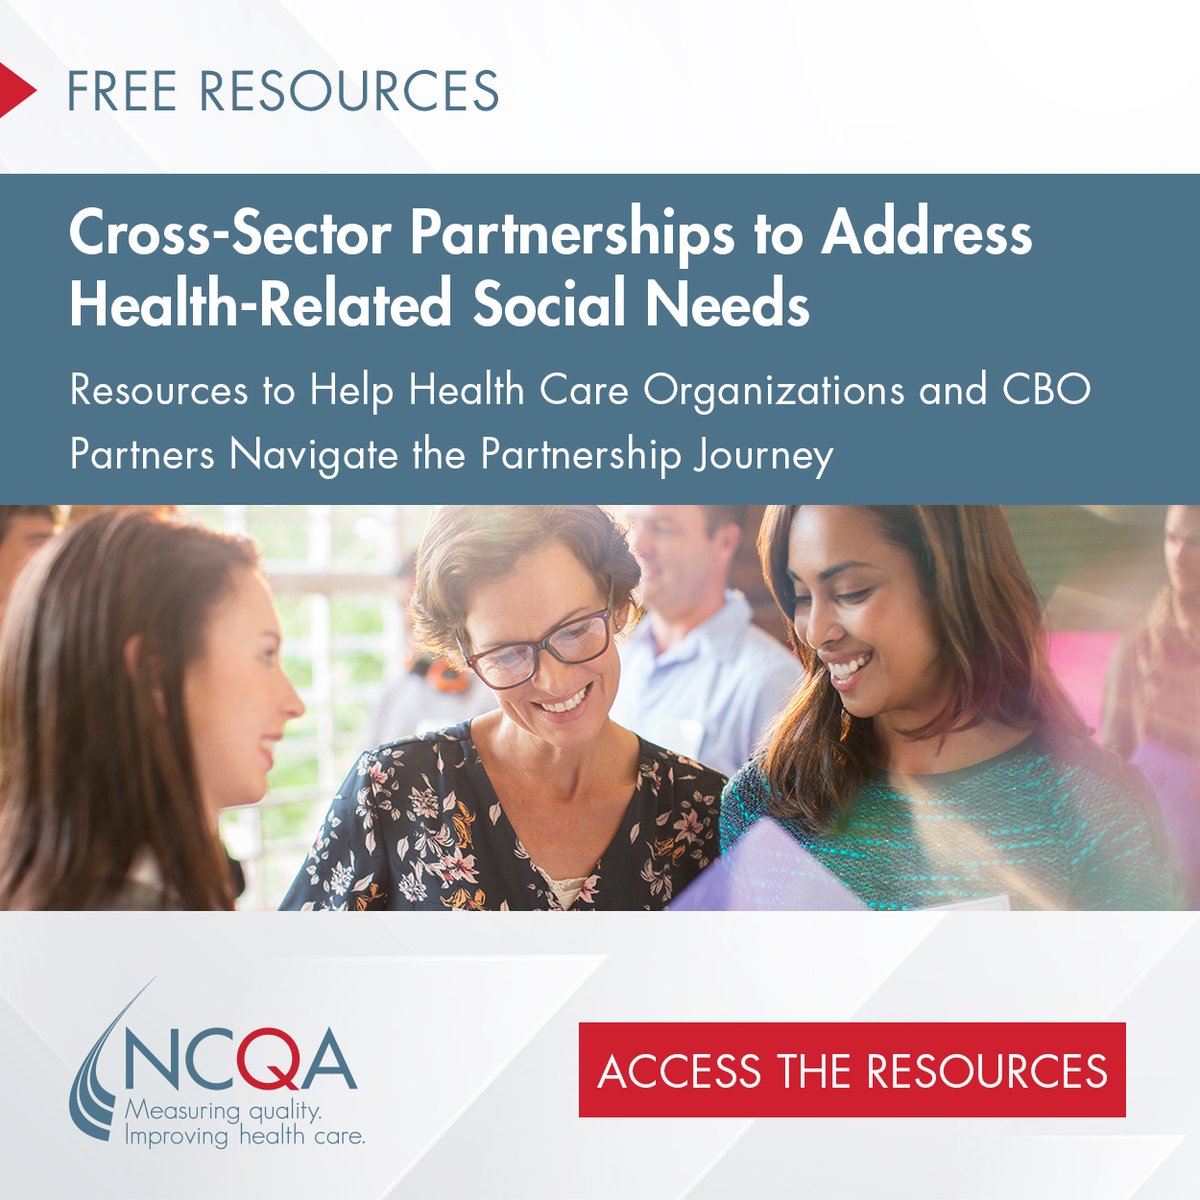 Cross-sector partnerships are a key strategy to addressing health-related social needs. Download our free toolkits, supported by @TakedaPharma, and gain insights to mitigate health disparities and advance health equity: bit.ly/4cL9VTN